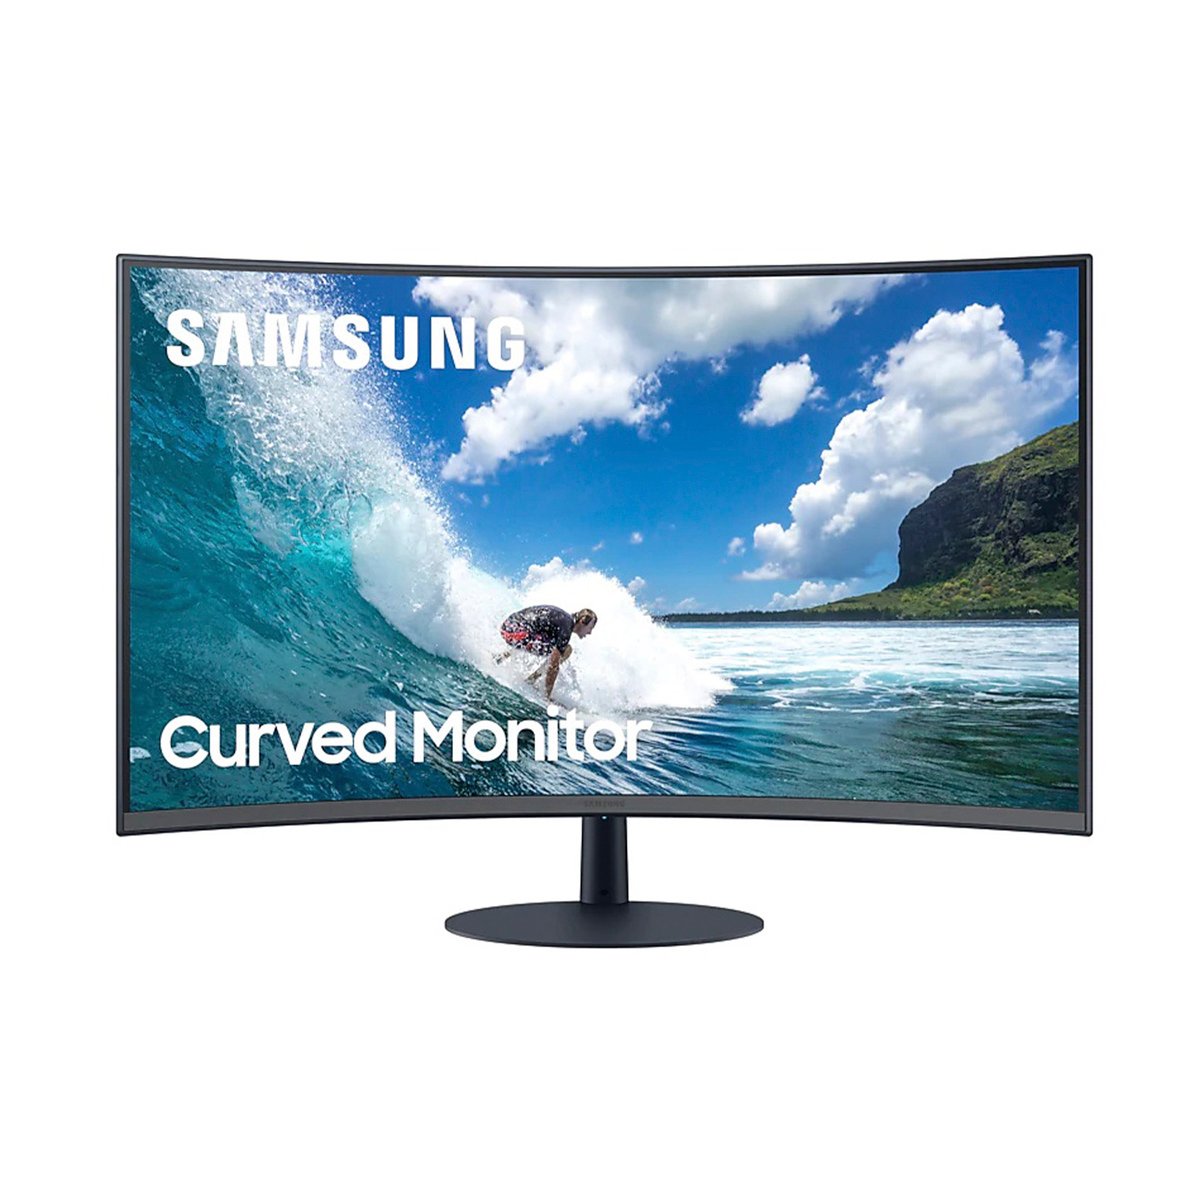 Samsung 24" Curved Monitor with optimal curvature 1000R LC24T550